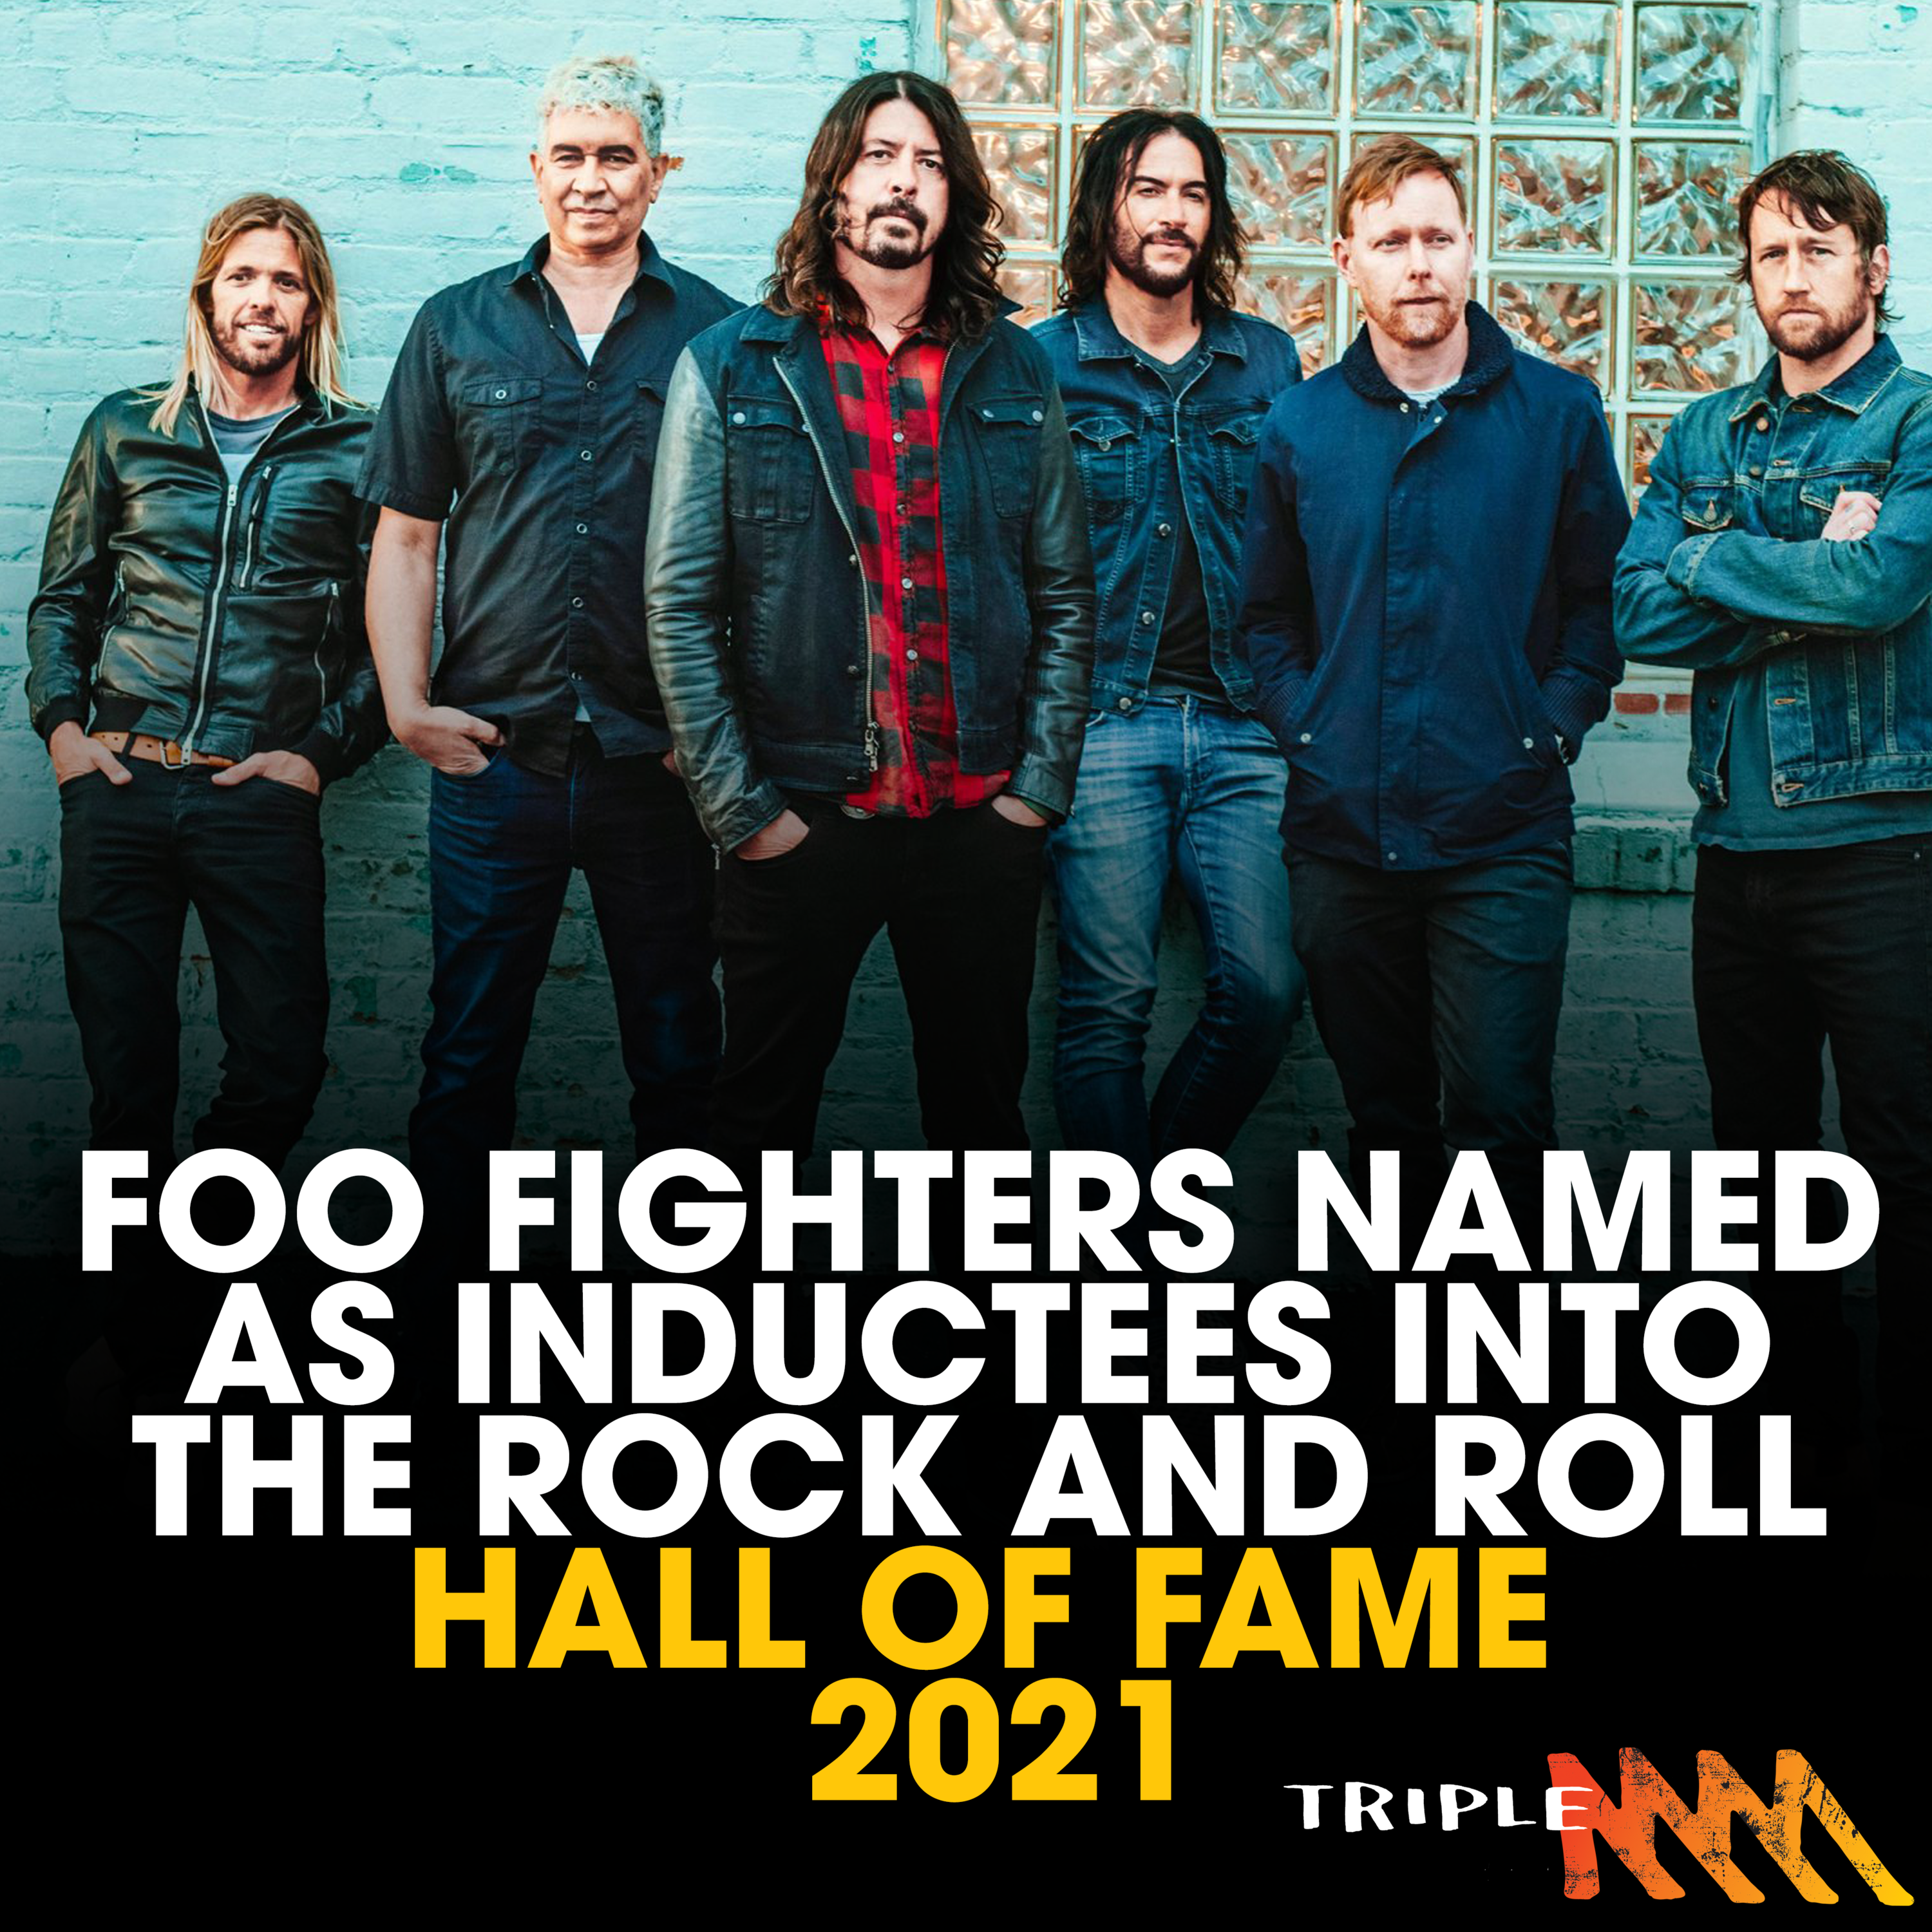 Foo Fighters named as inductees into the Rock and Roll Hall of Fame 2021